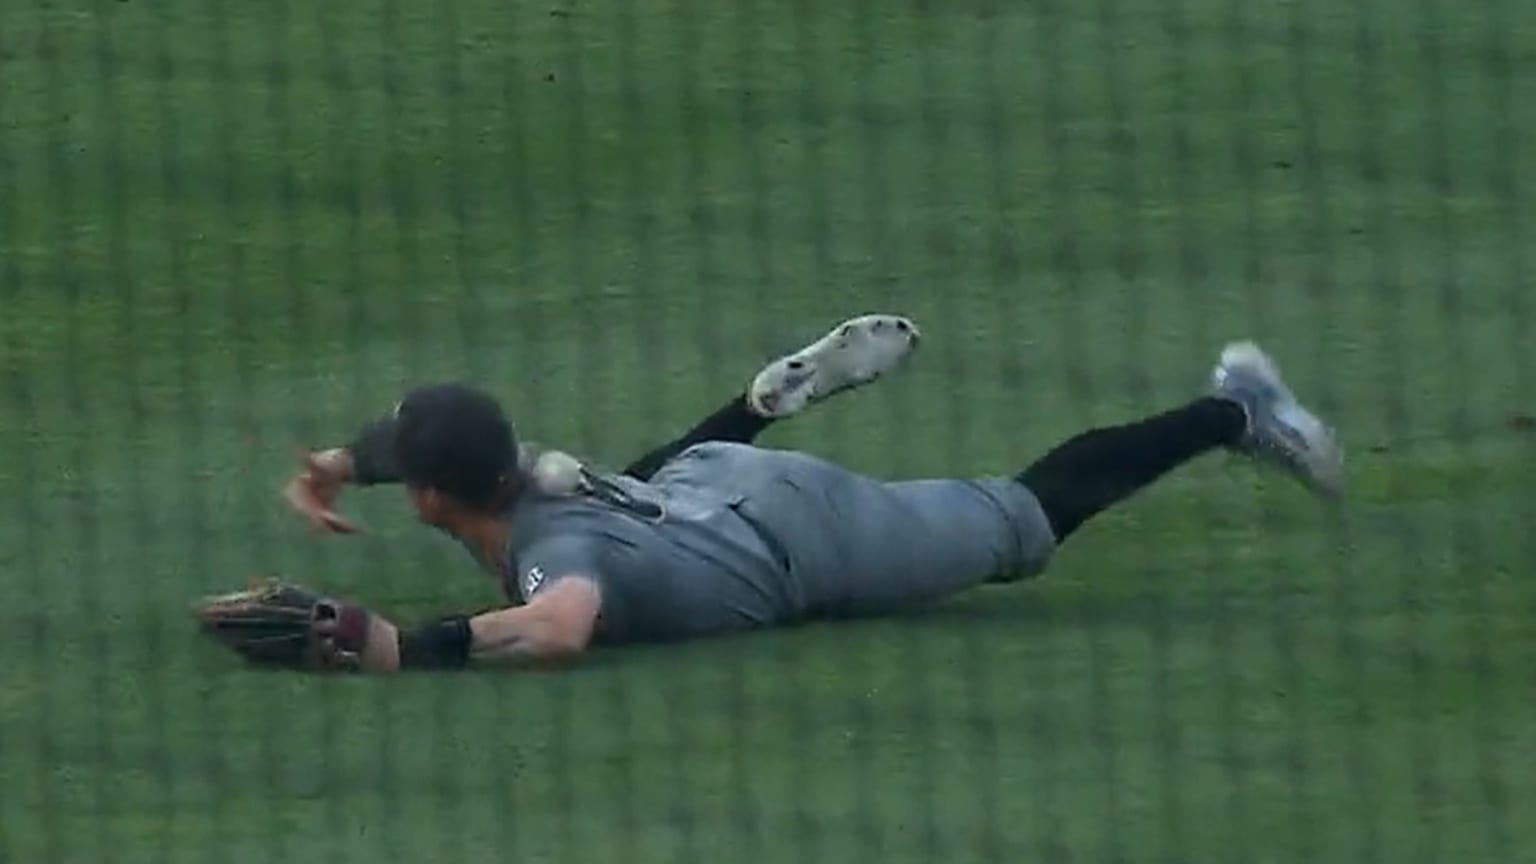 A screengrab shows a baseball rolling across an outfielder's back